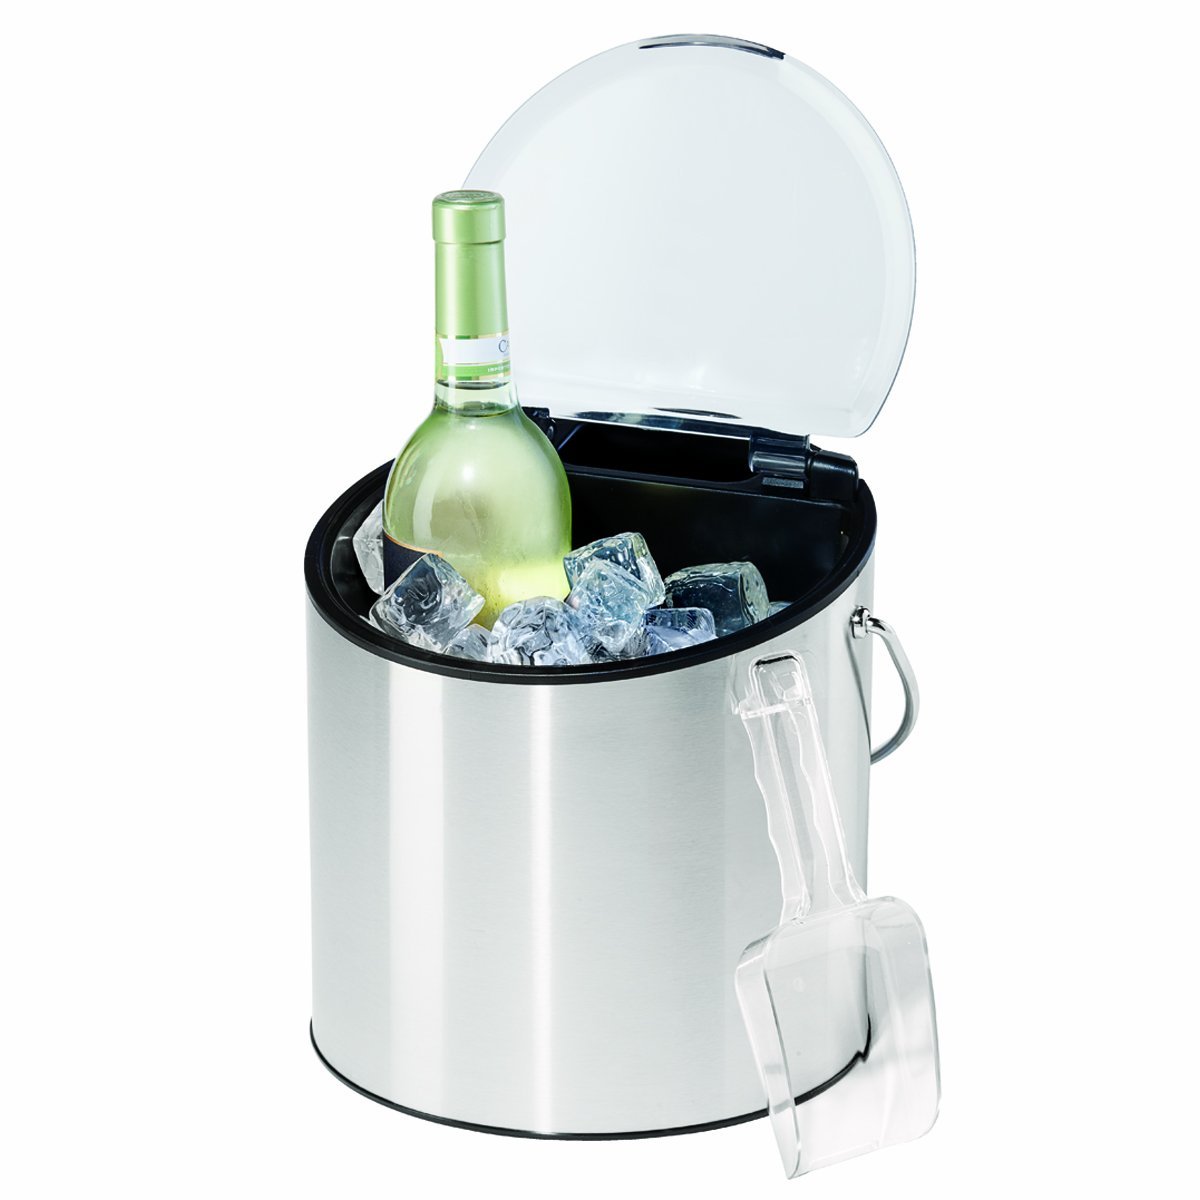 OGGI Wine & Ice Bucket- Ice Bucket with Lid & Ice Scoop, Wine Chiller Bucket, Tabletop Wine Chiller Holds 2 Bottles, Bar Set is Great Addition to Bar Cart or Home Bar Accessories, 4-Quart